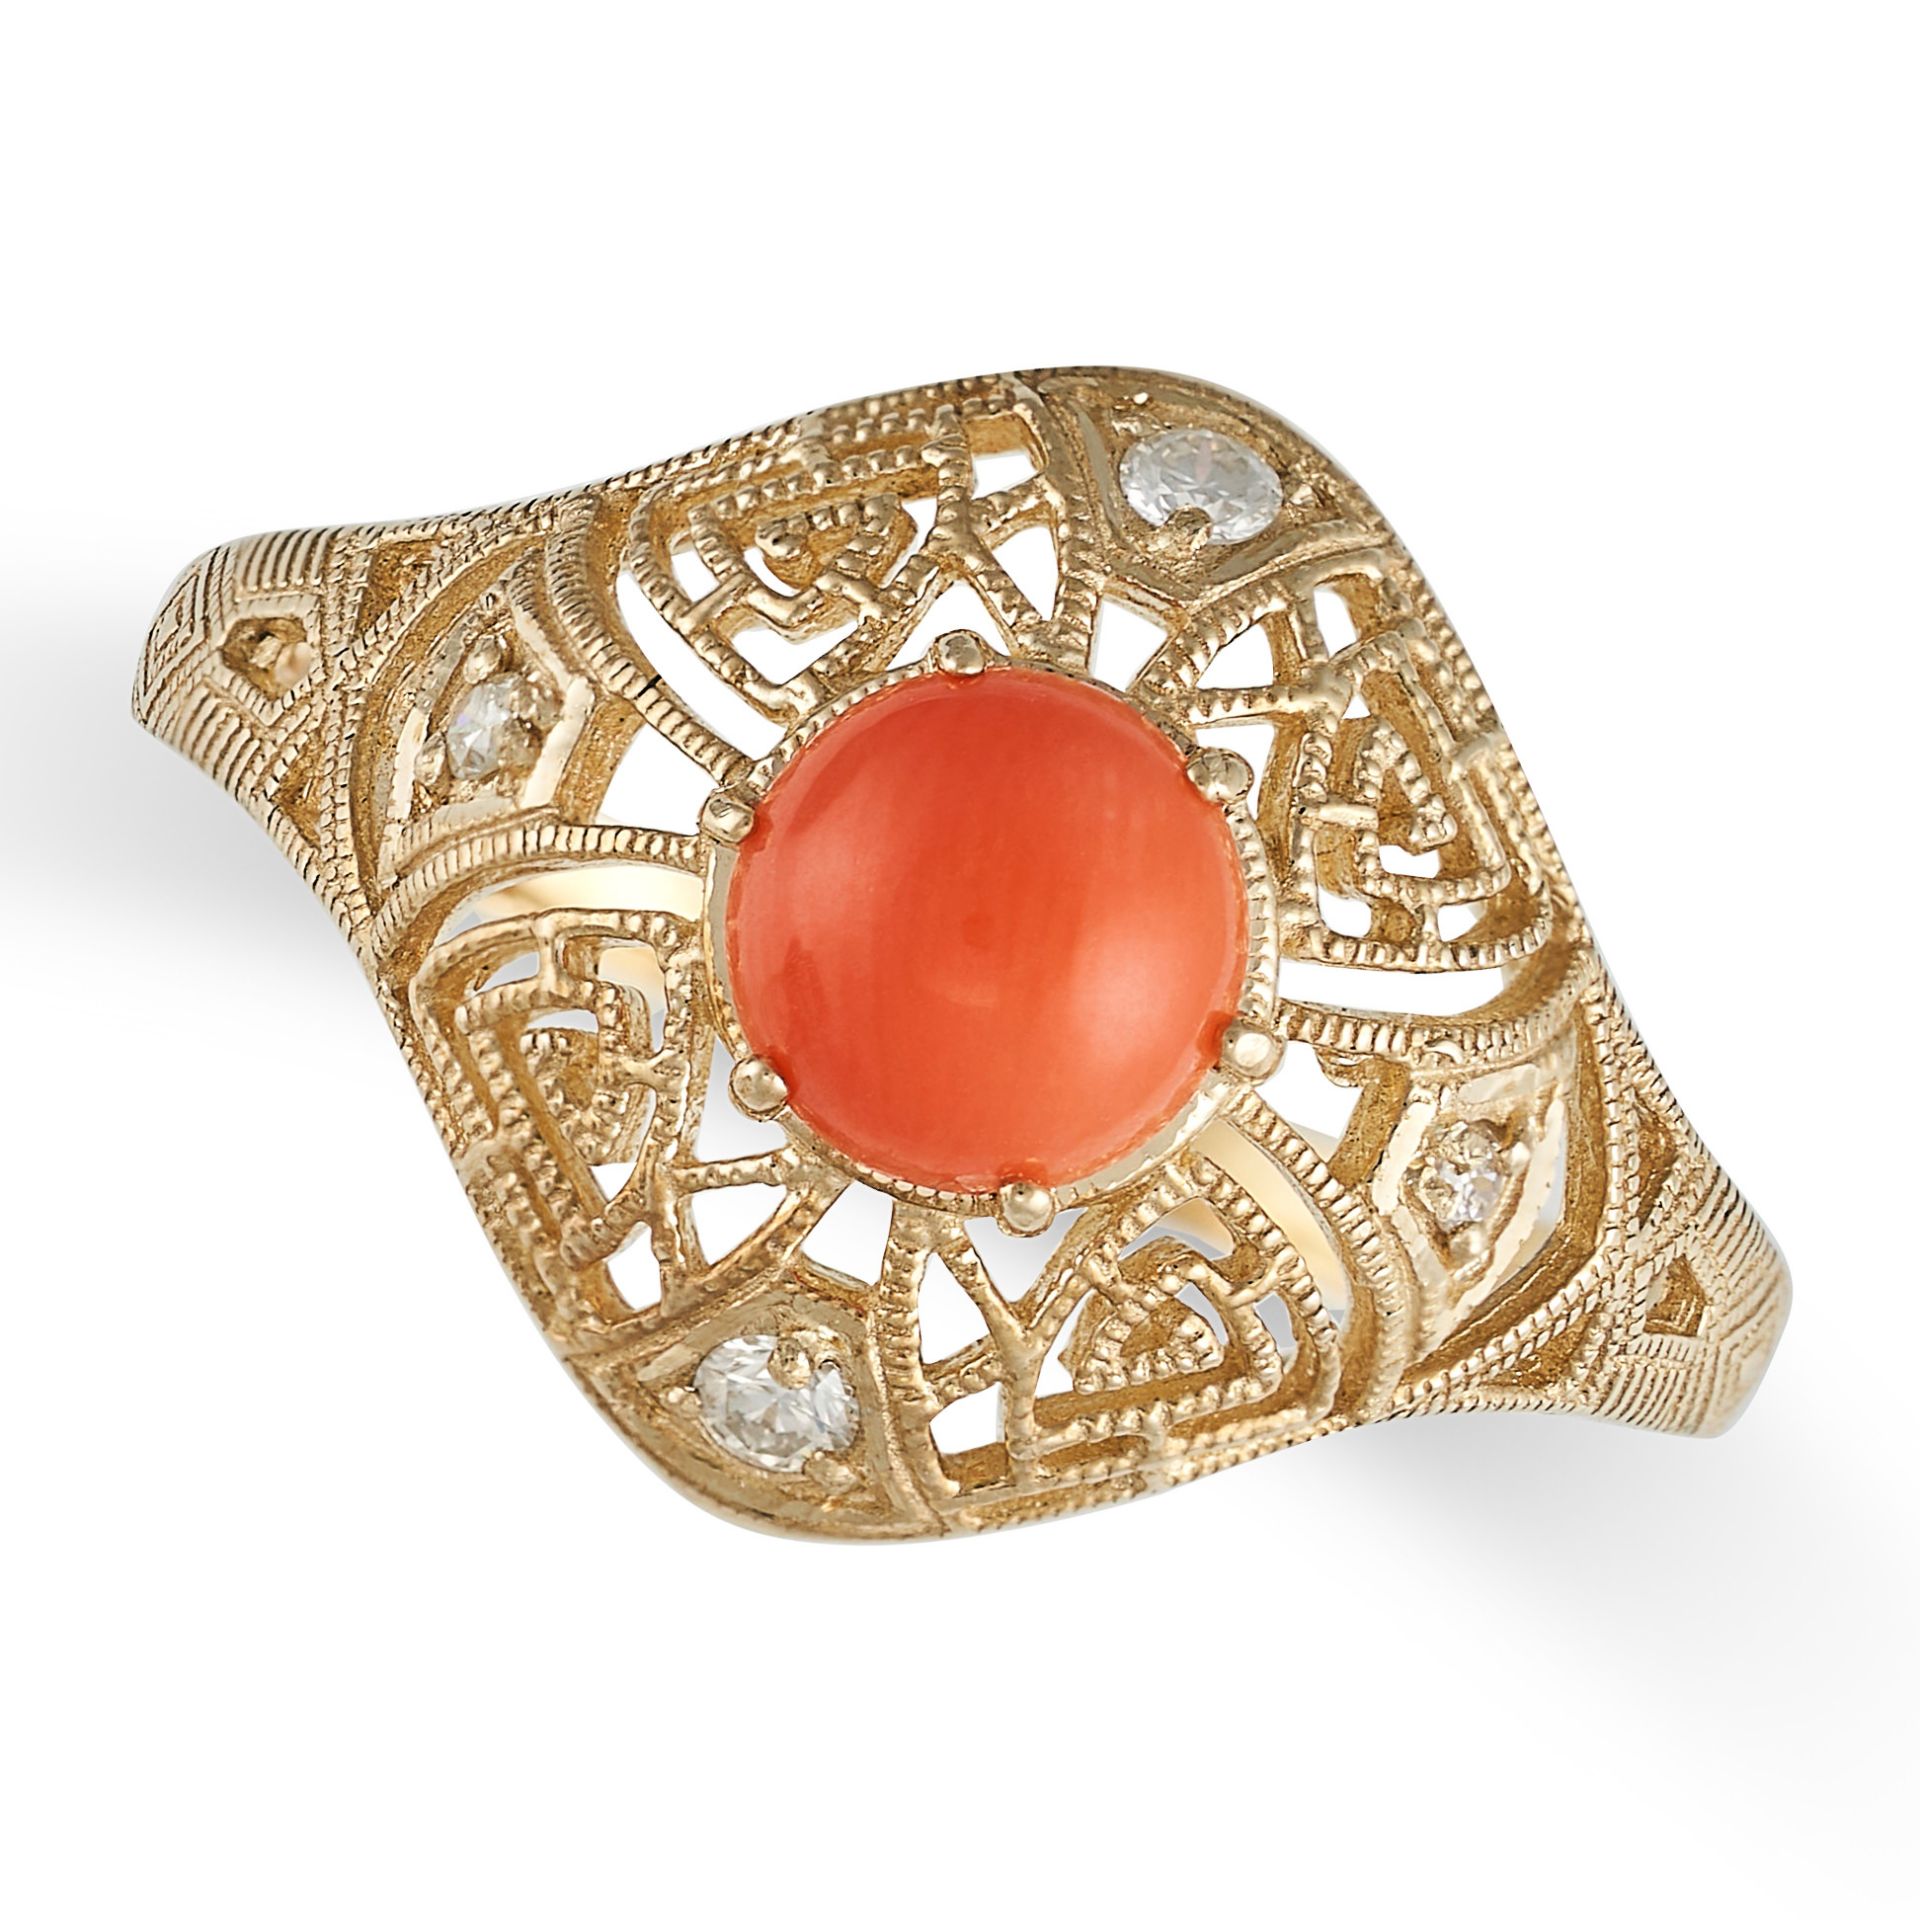 A CORAL AND DIAMOND DRESS RING in 9ct yellow gold, set with a circular cabochon coral in an openw...